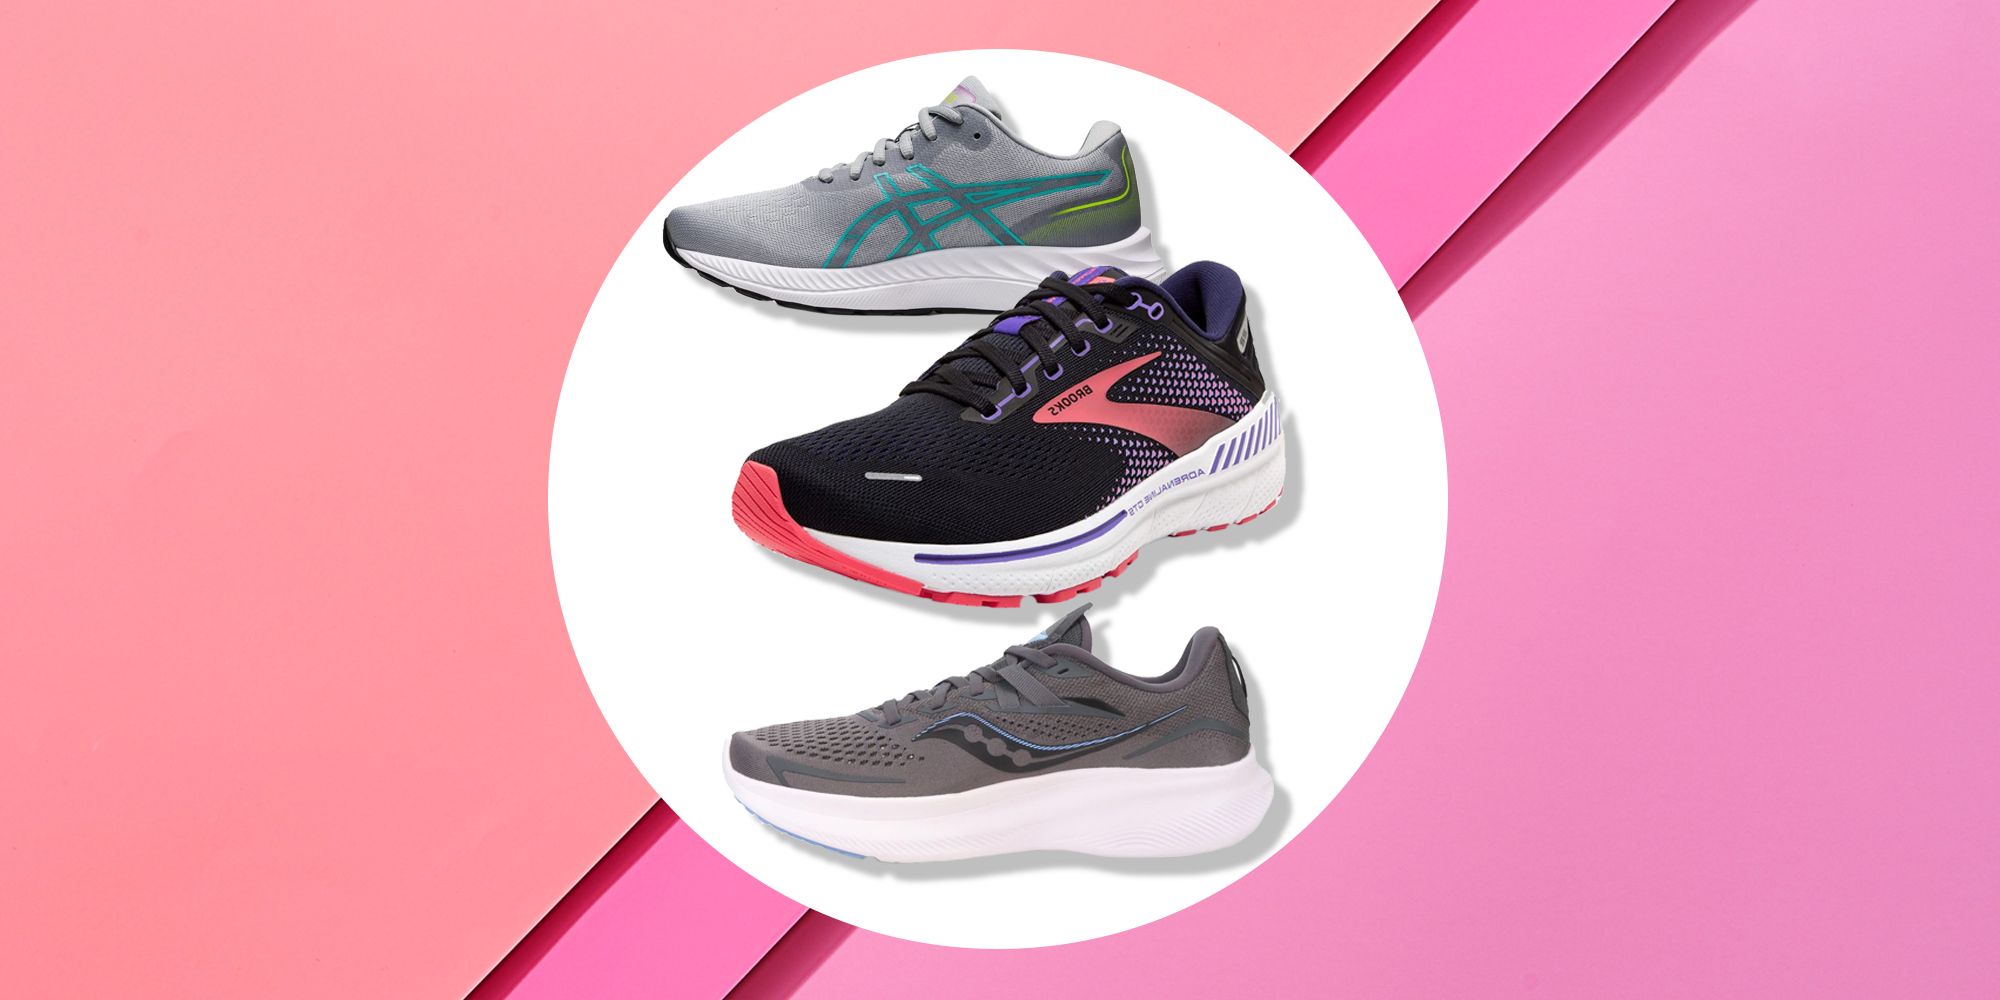 Running Shoe Reviews | Fit, Cushion, Comfort, Value | WearTesters